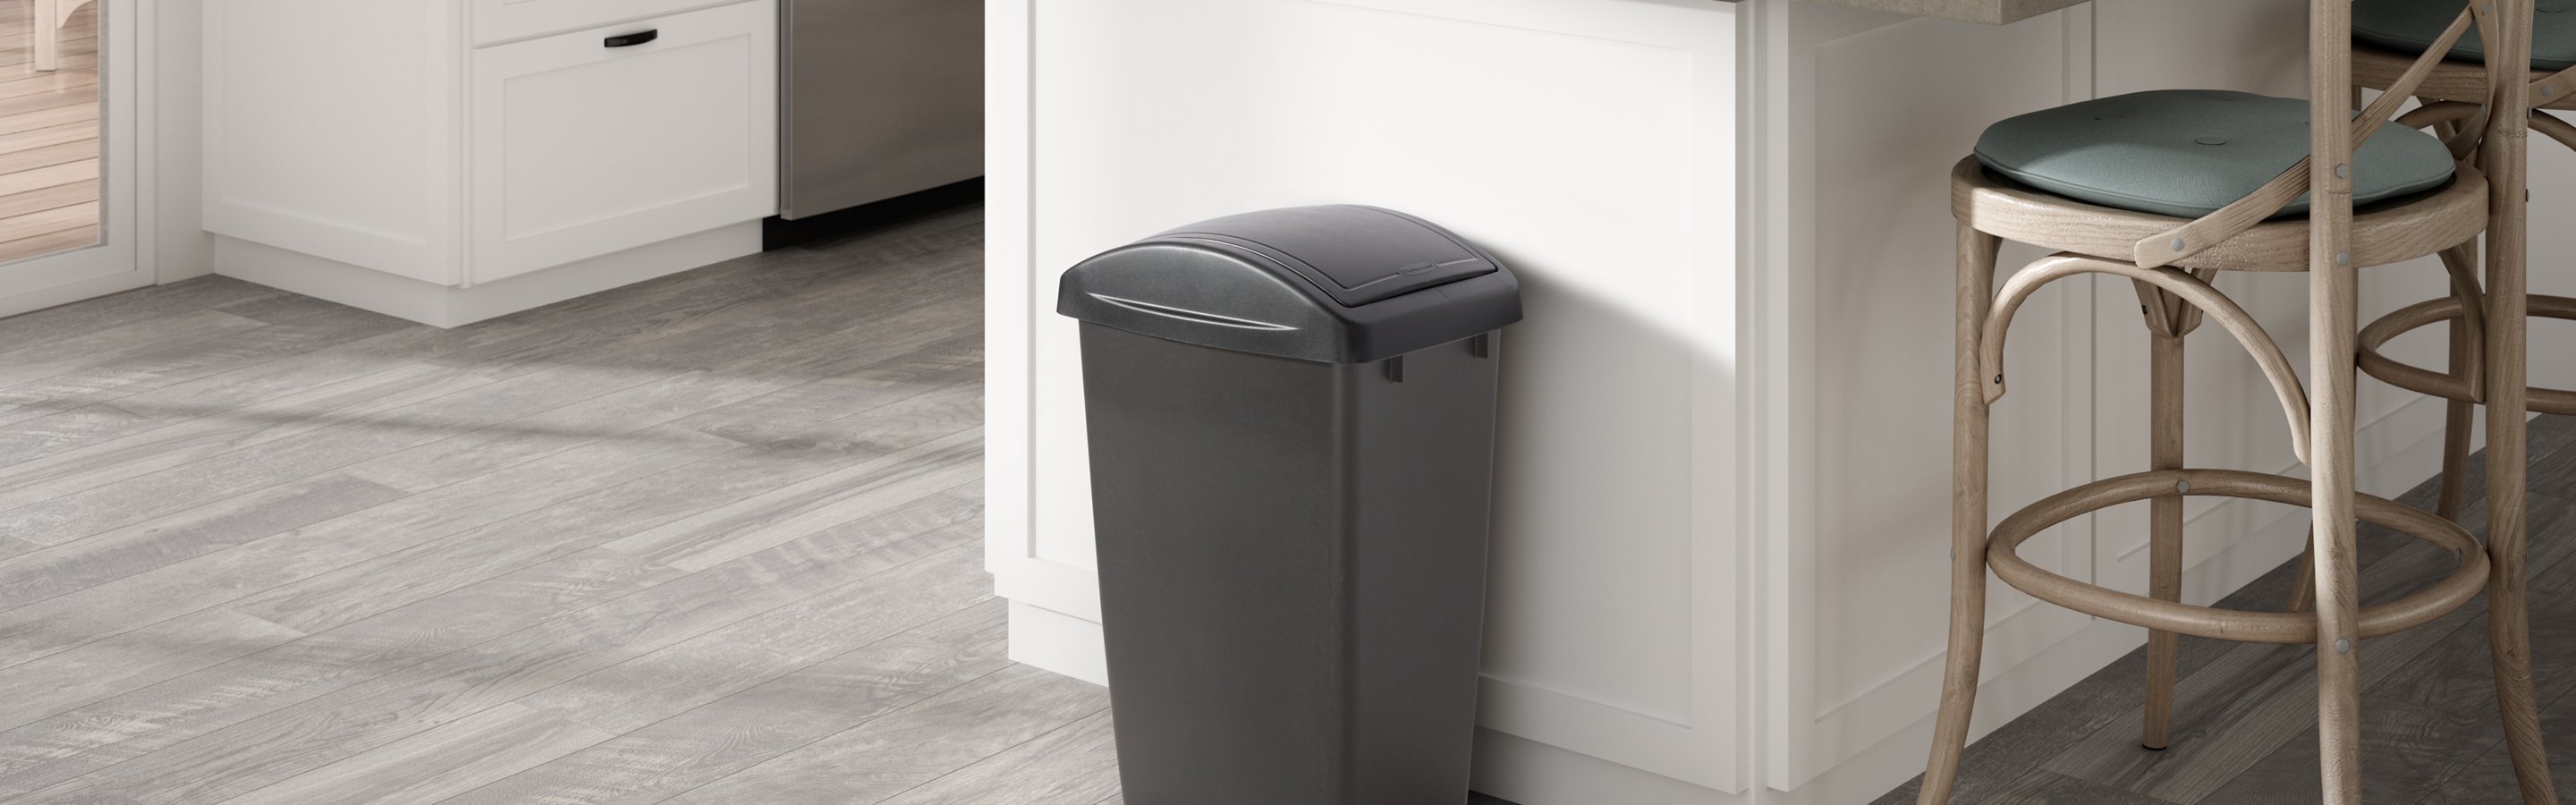 Rubbermaid 1/2 Round Trash Can Top with Swing Door 3620-00 BLA 